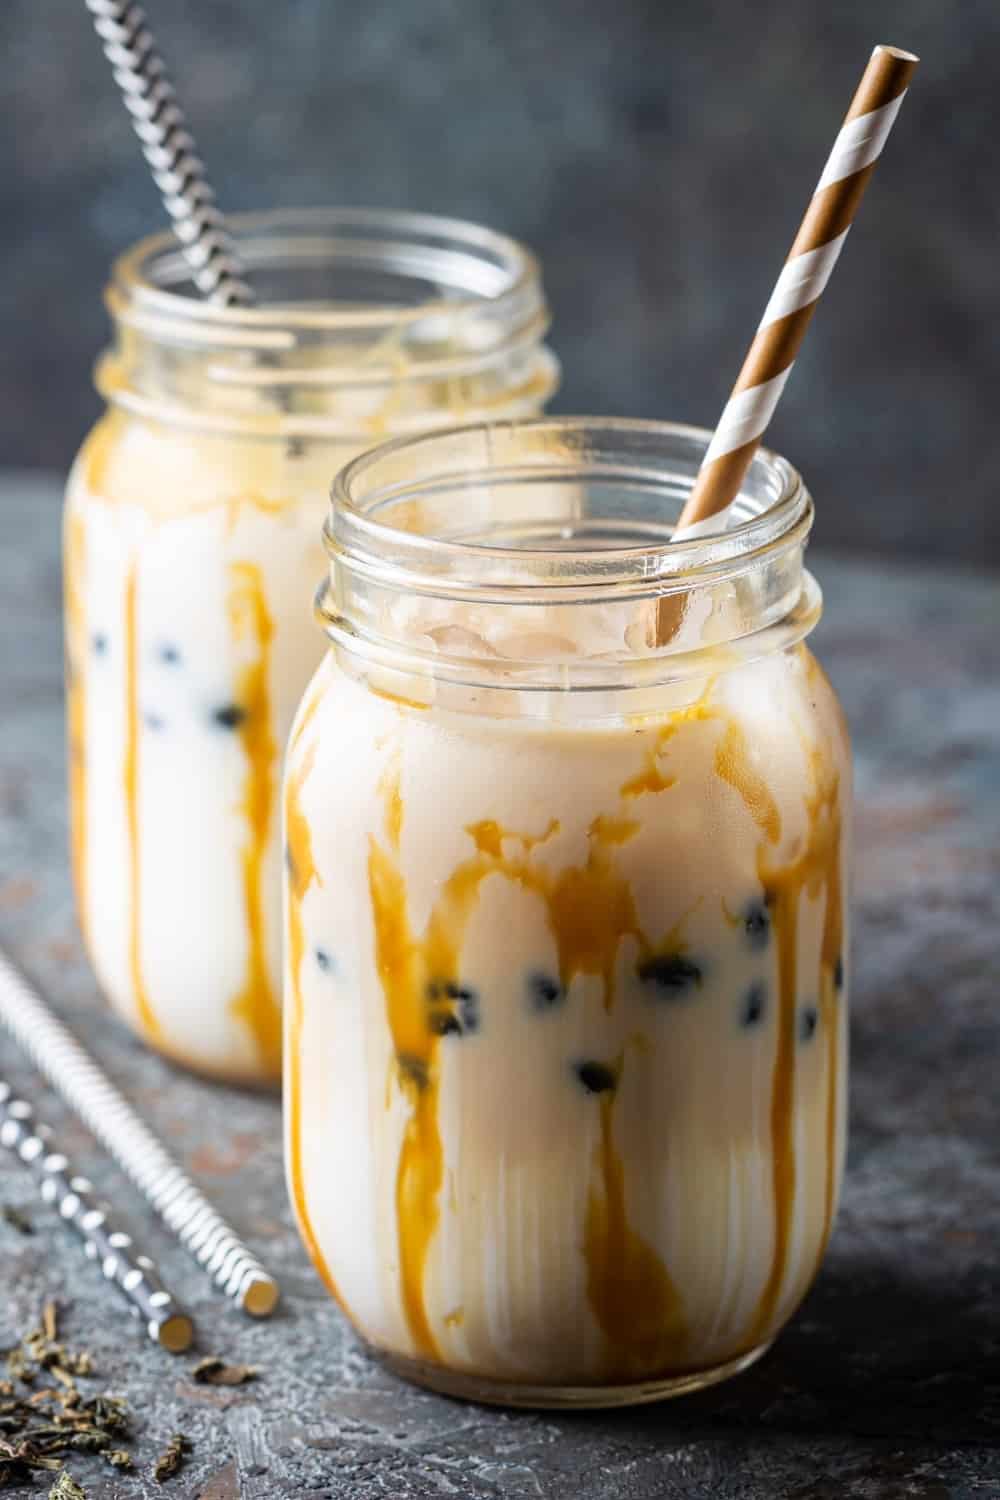 Light brown creamy bubble tea with milk and black tapioca in a glass jar on gray background